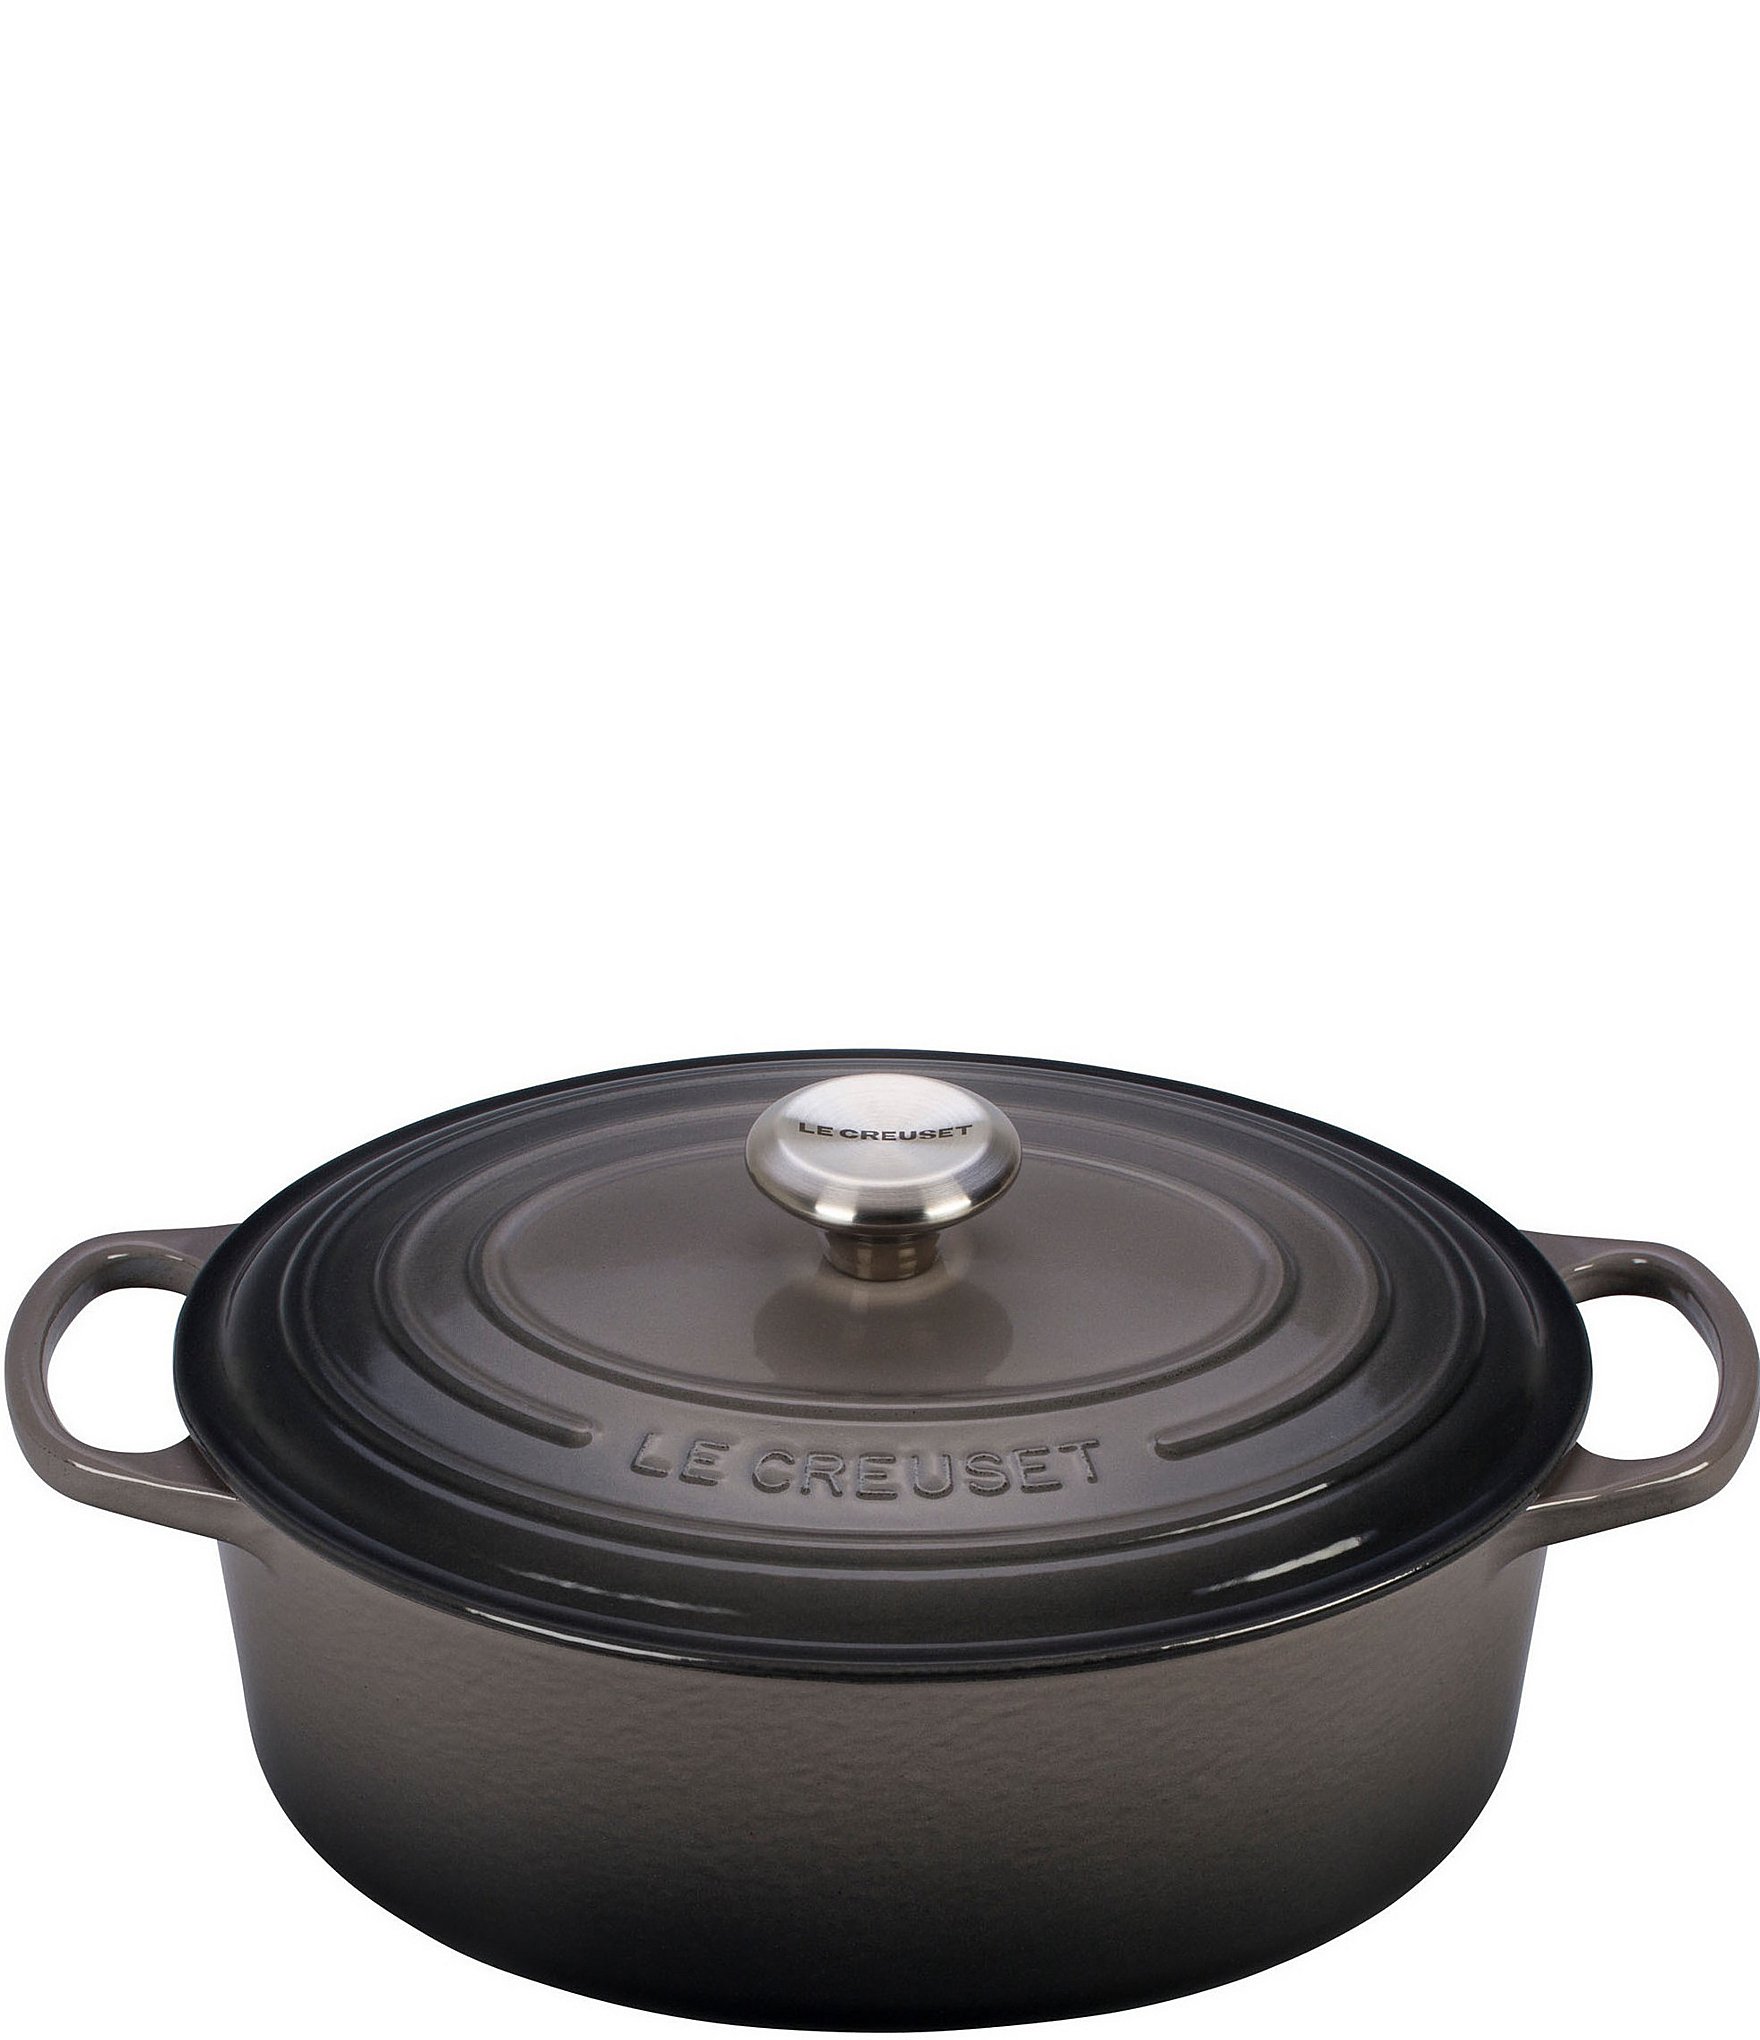 https://dimg.dillards.com/is/image/DillardsZoom/zoom/le-creuset-5-quart-signature-oval-dutch-oven-with-stainless-steel-knob/05532812_zi_oyster.jpg